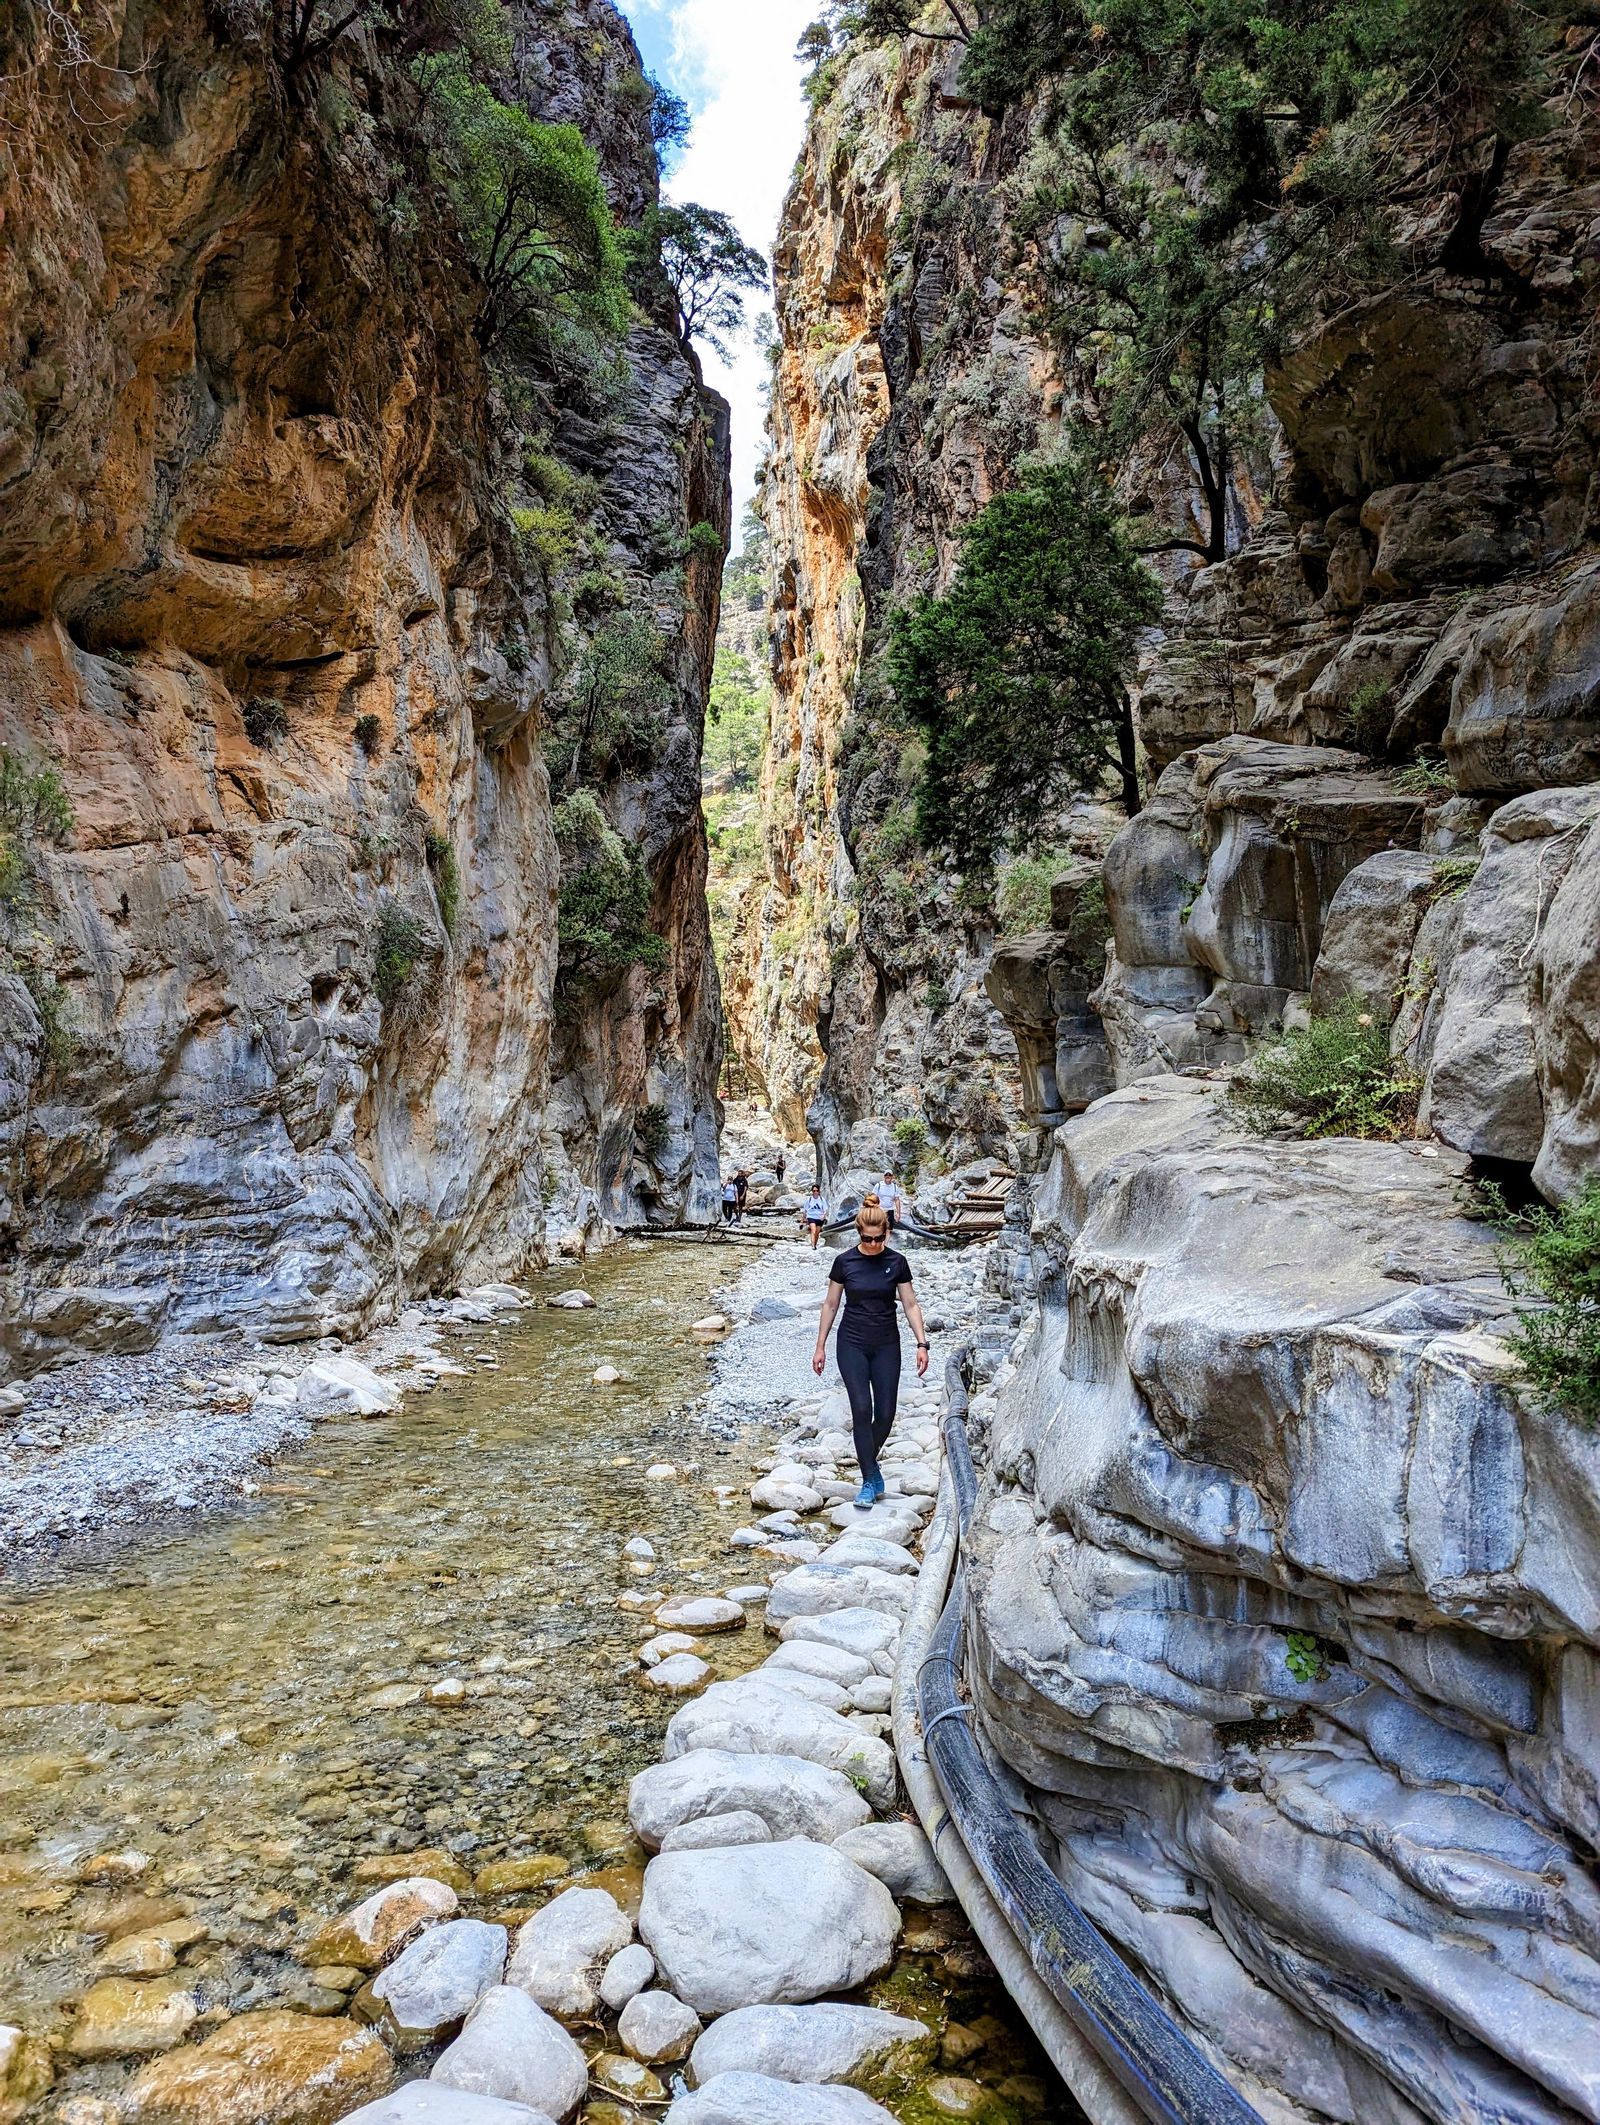 The Samaria Gorge Hike: Getting There by Public Transport and Other Essential Tips